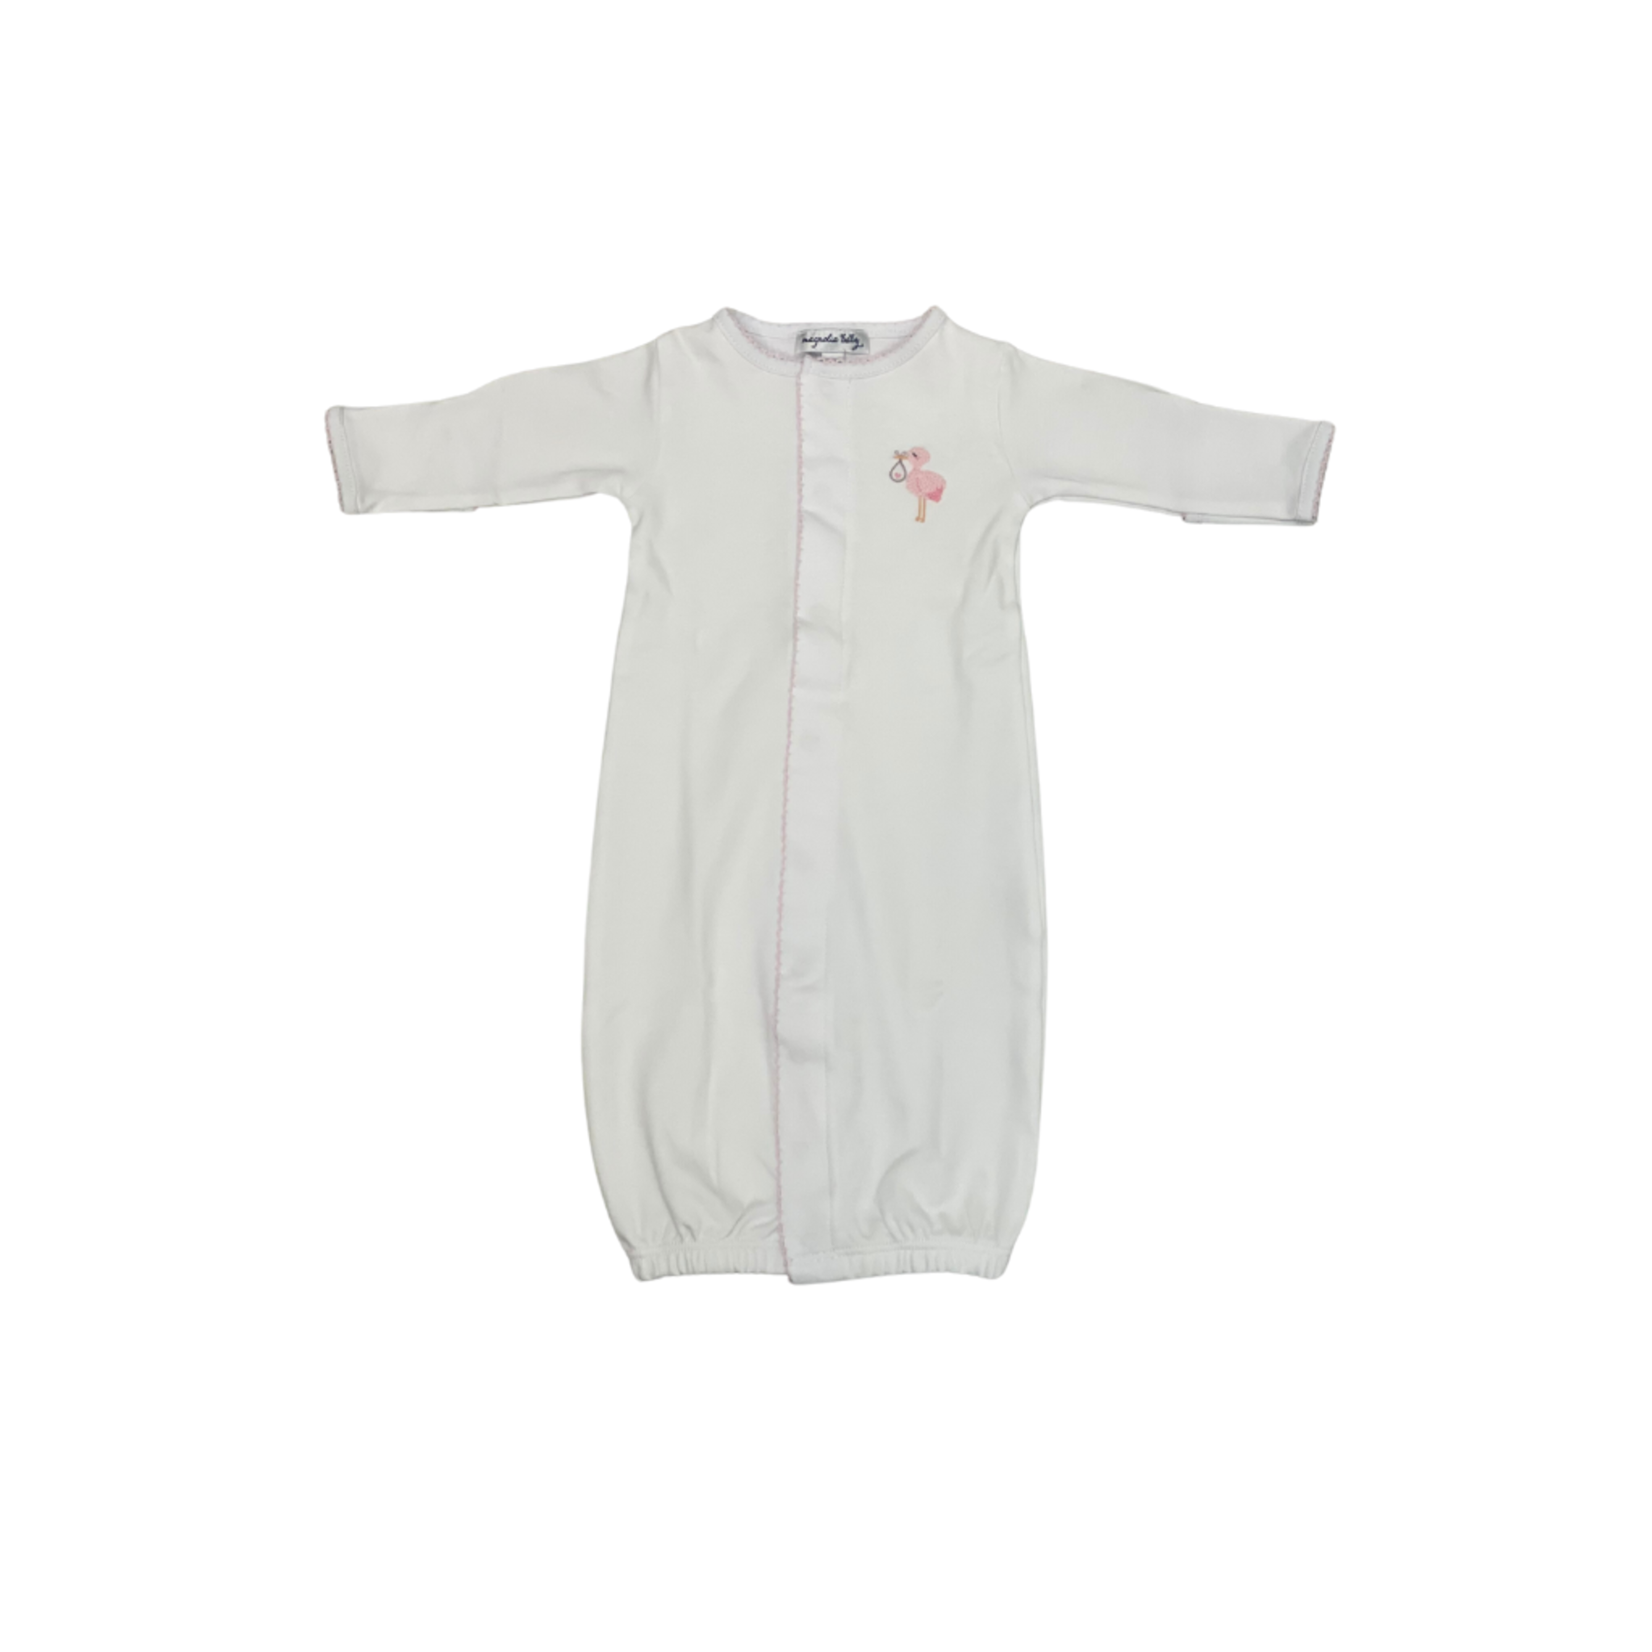 Magnolia Baby Tiny Stork Embroidered Converter